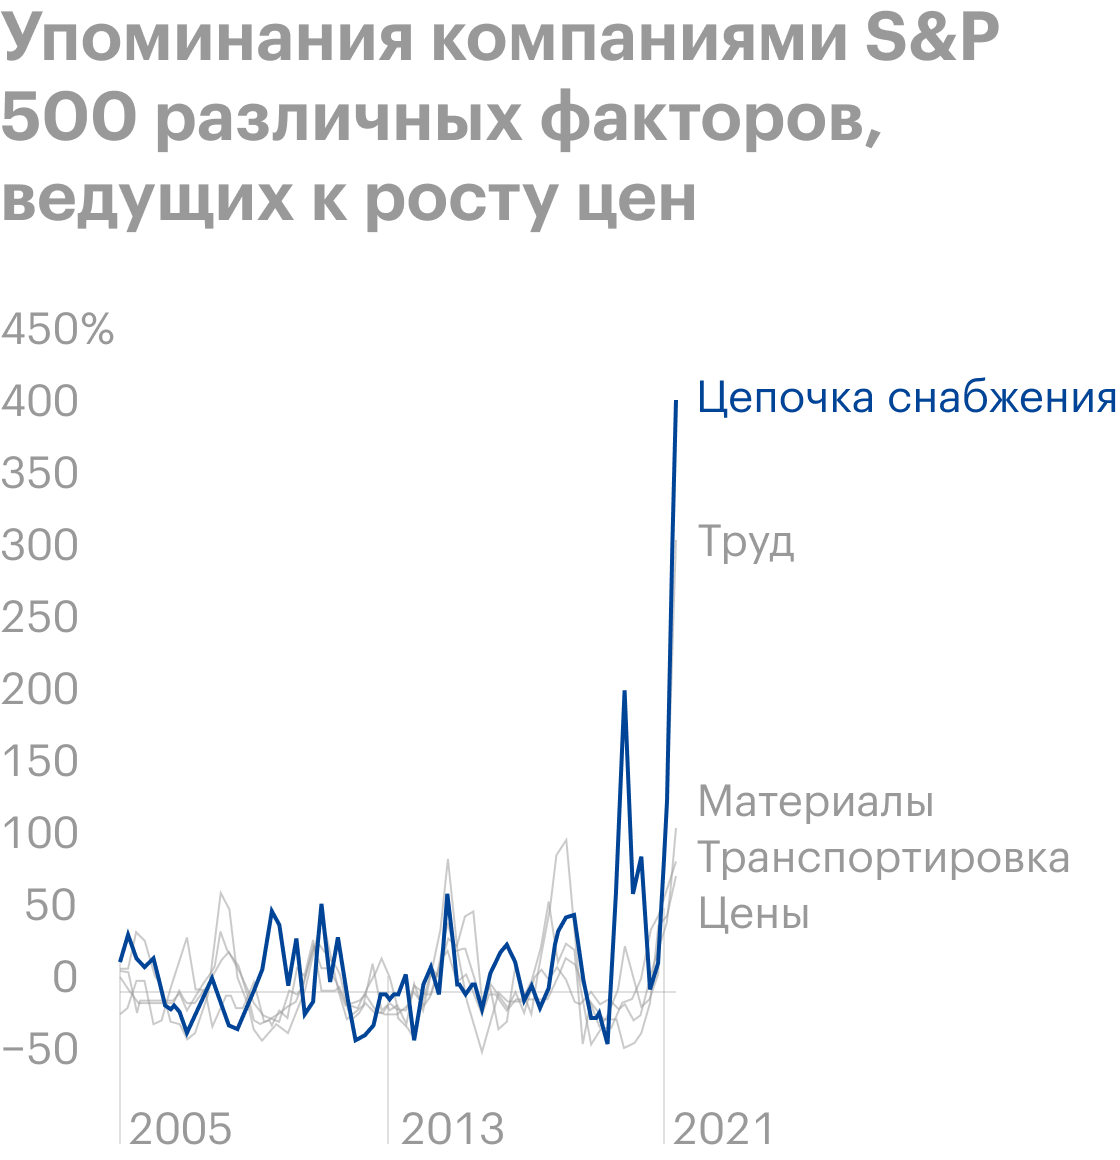 Источник: Daily Shot, Public firms increasingly mention supply and labor issues on earnings calls